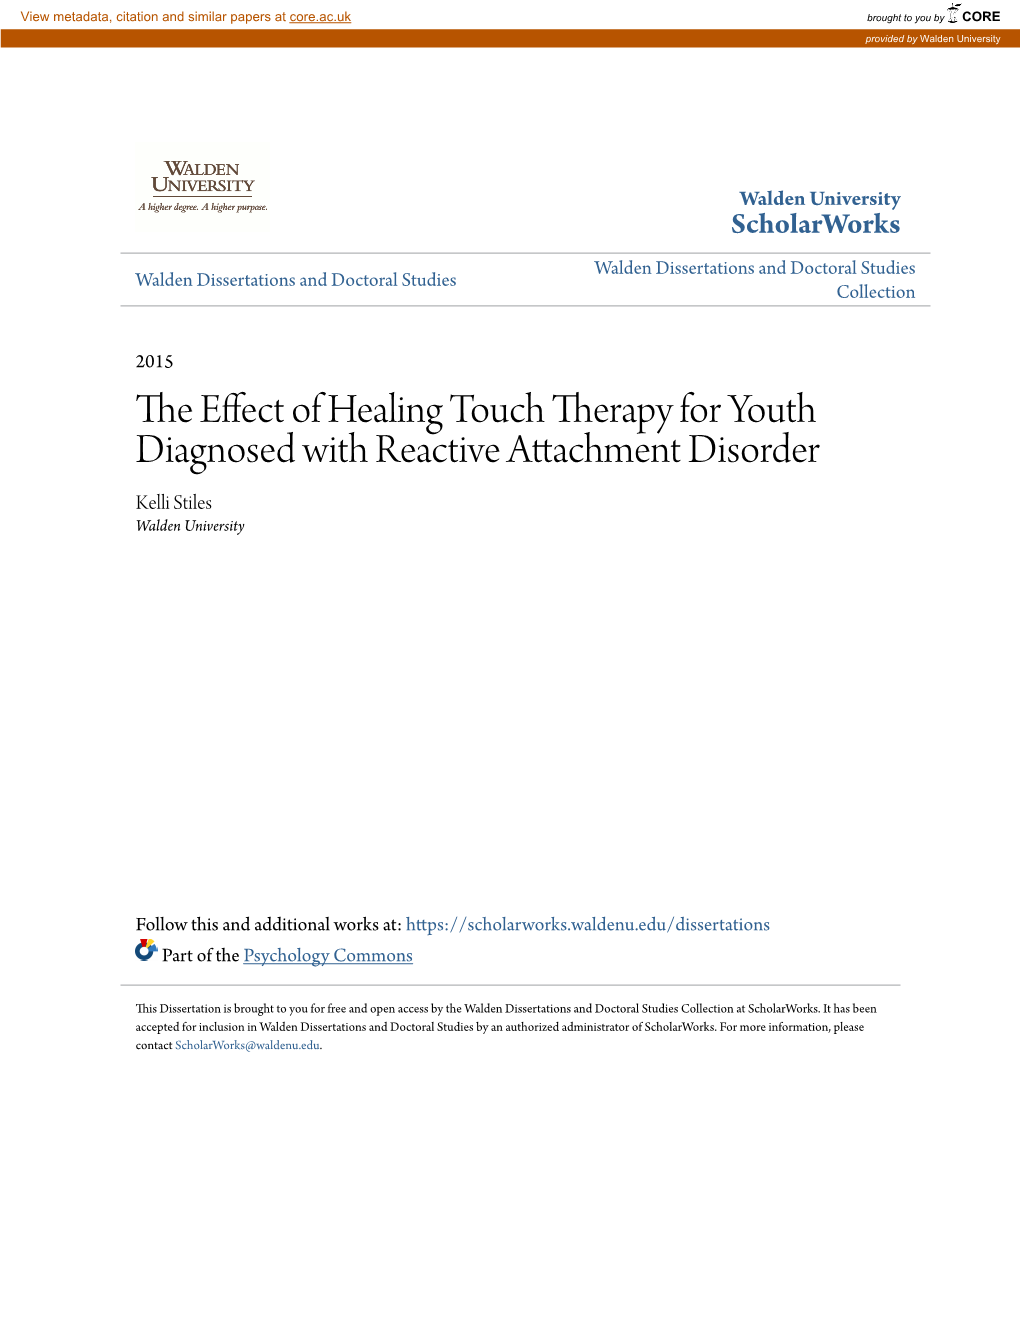 The Effect of Healing Touch Therapy for Youth Diagnosed with Reactive